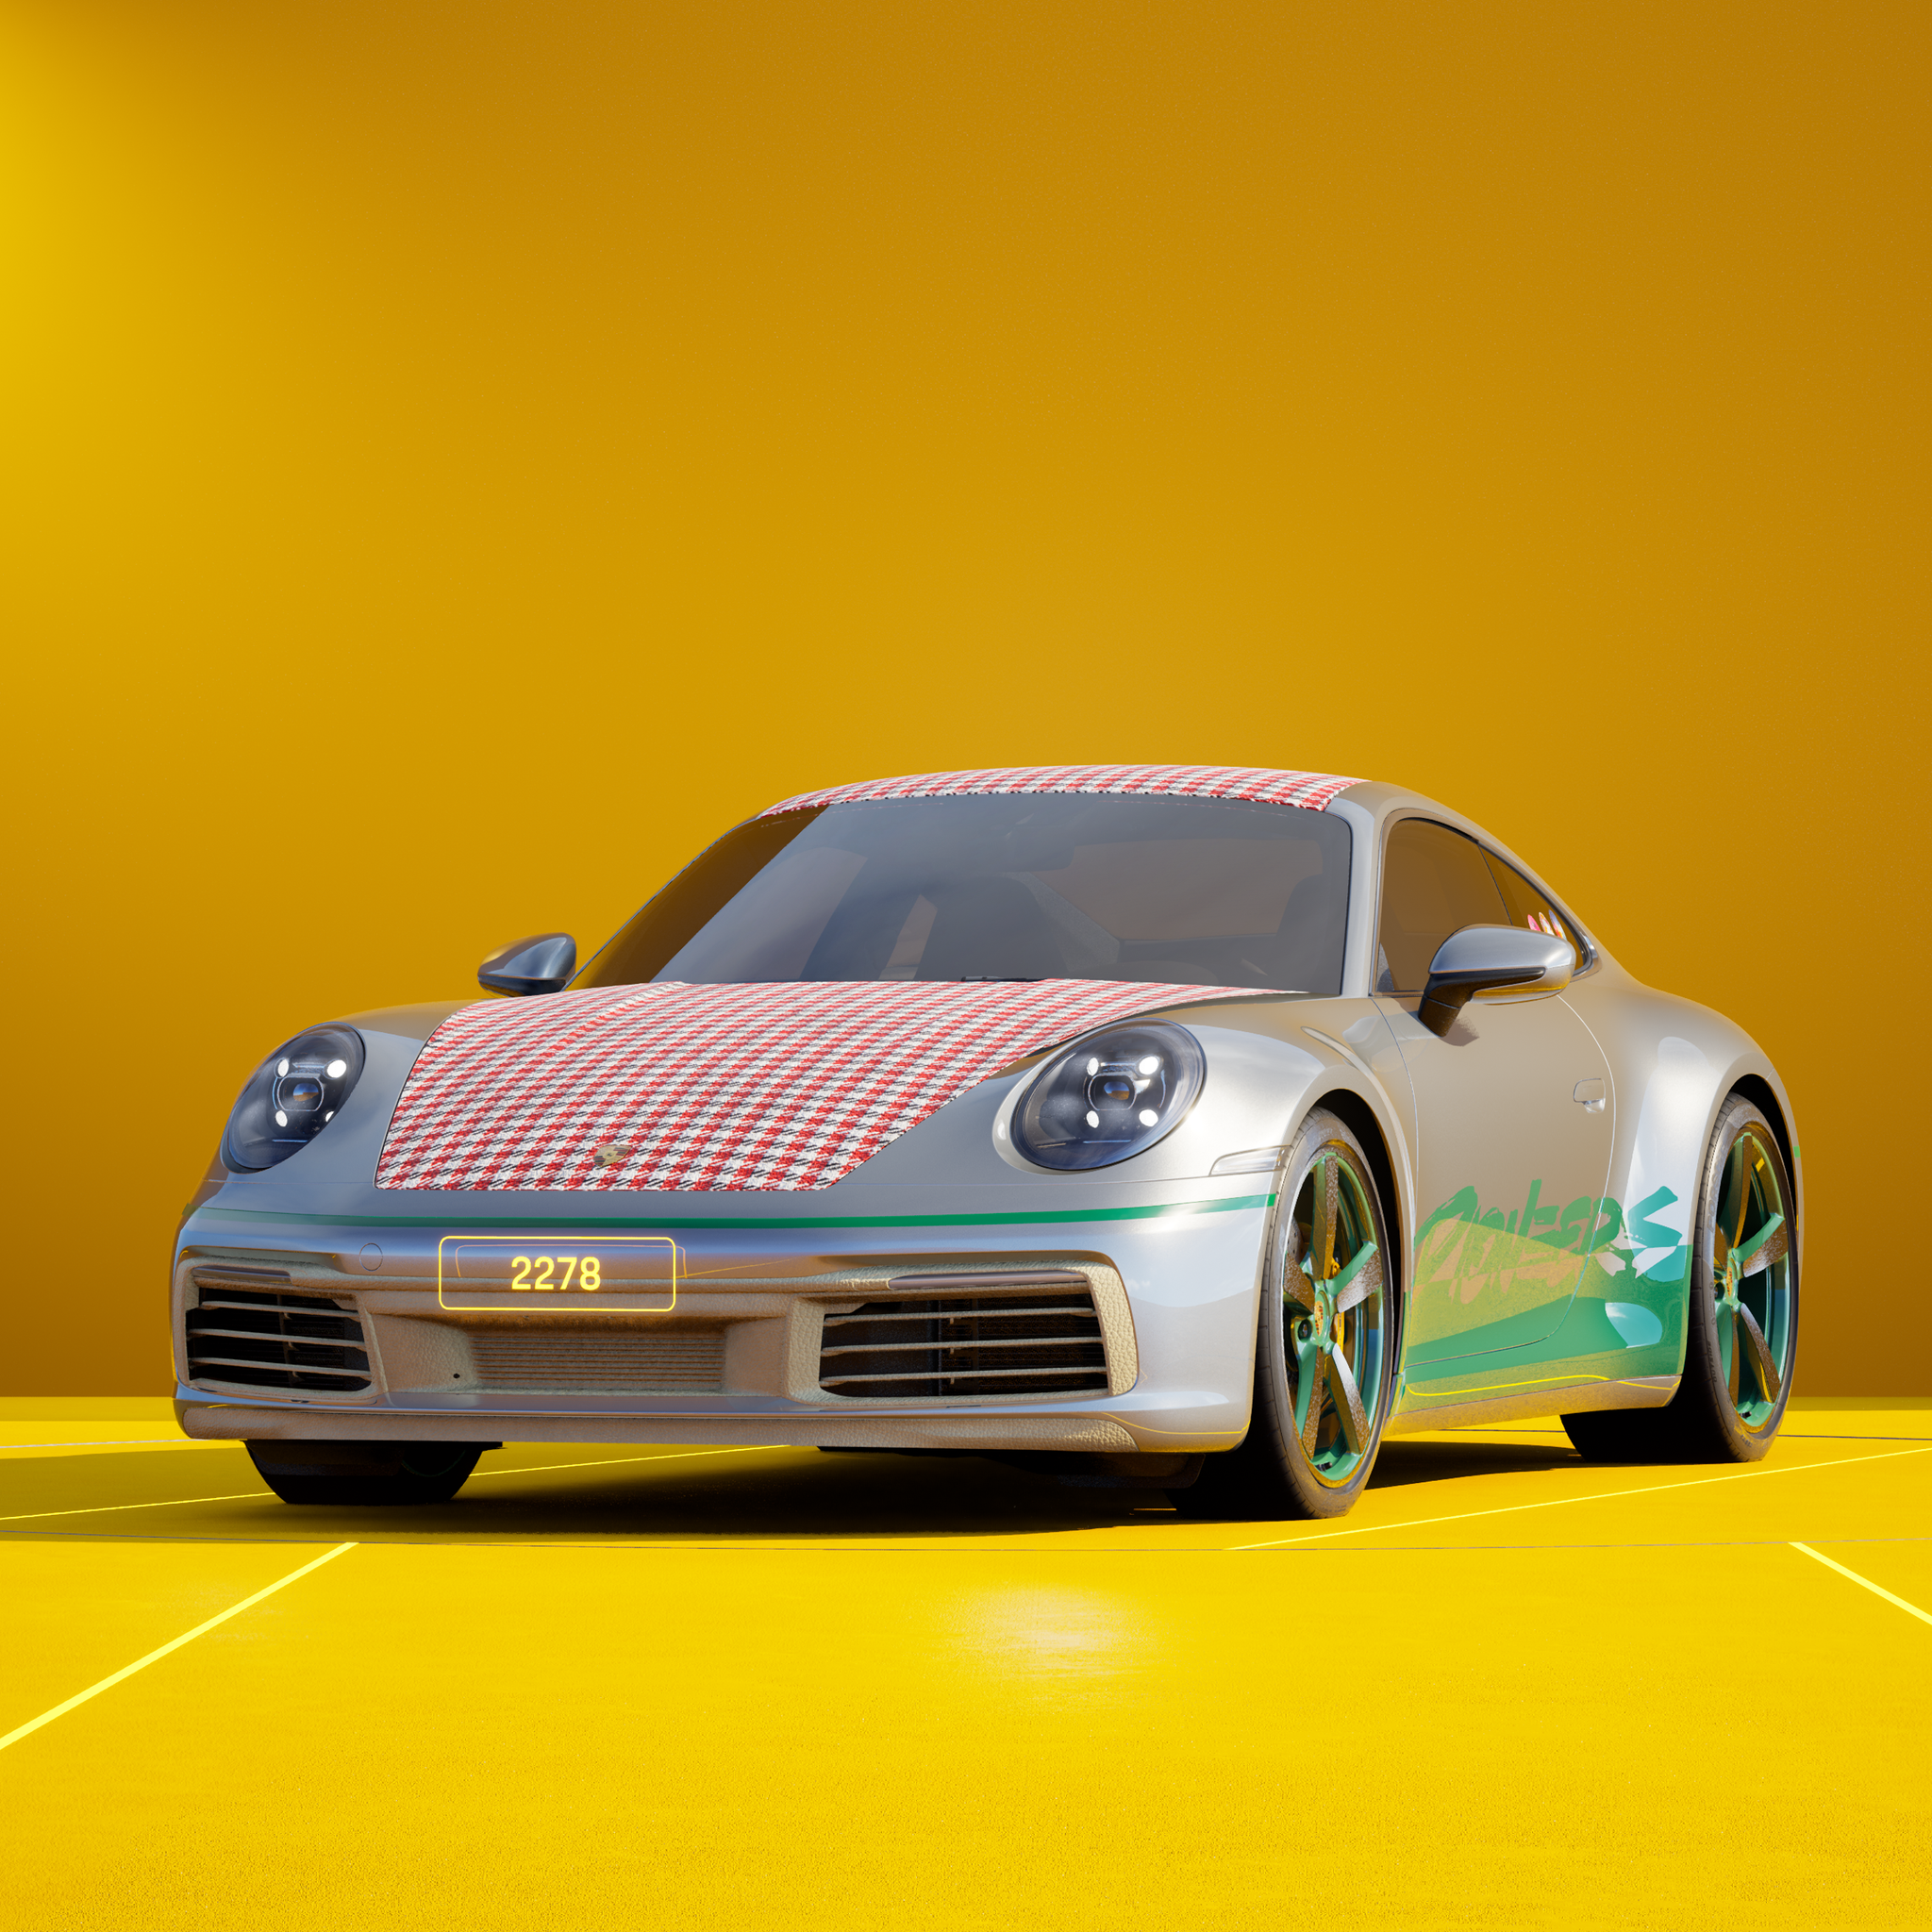 The PORSCHΞ 911 2278 image in phase